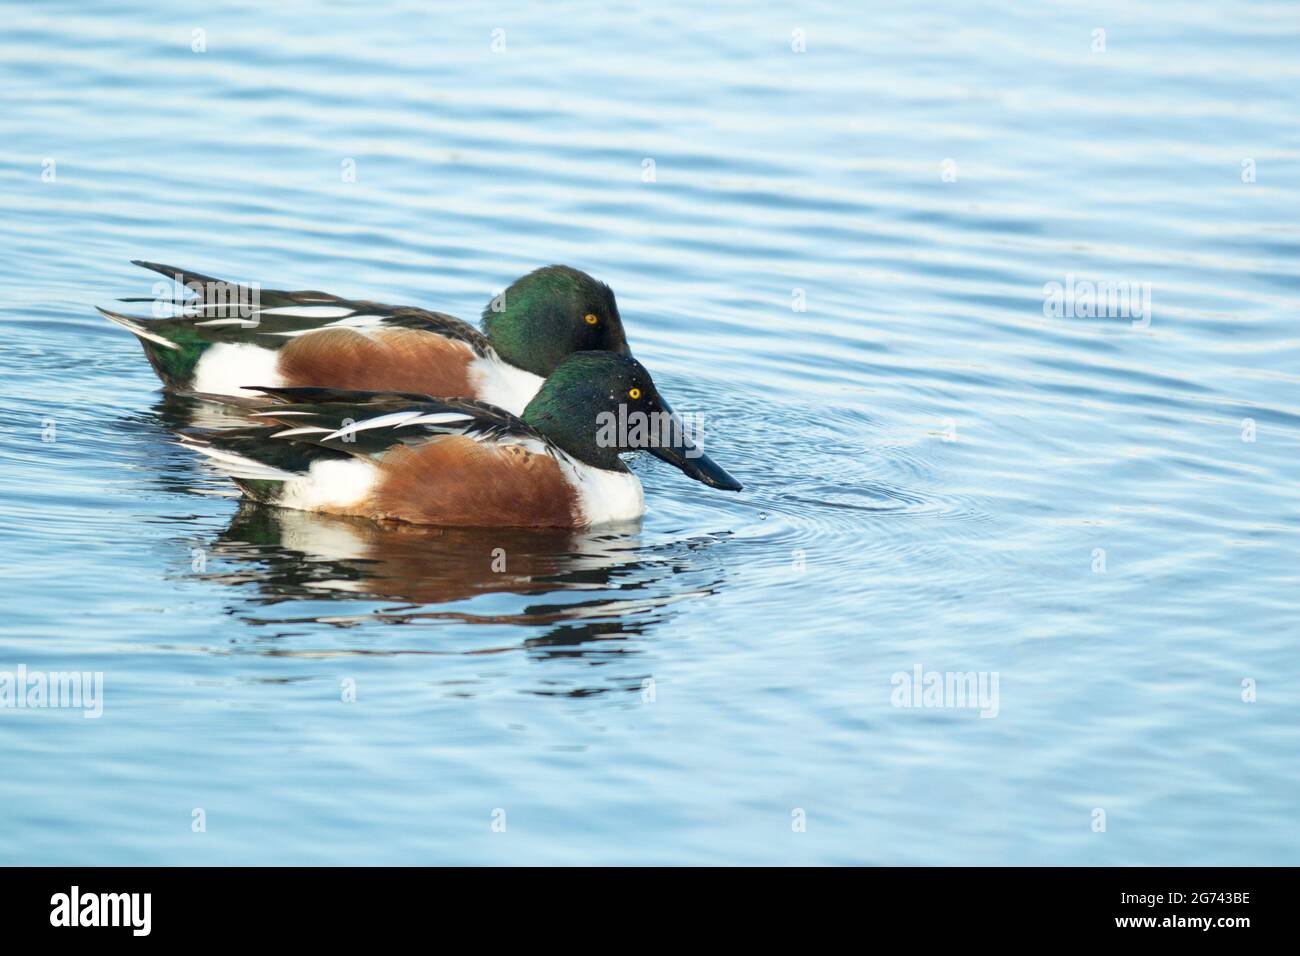 Pair of male Northern Shoveler ducks swimming in clean blue water Stock Photo